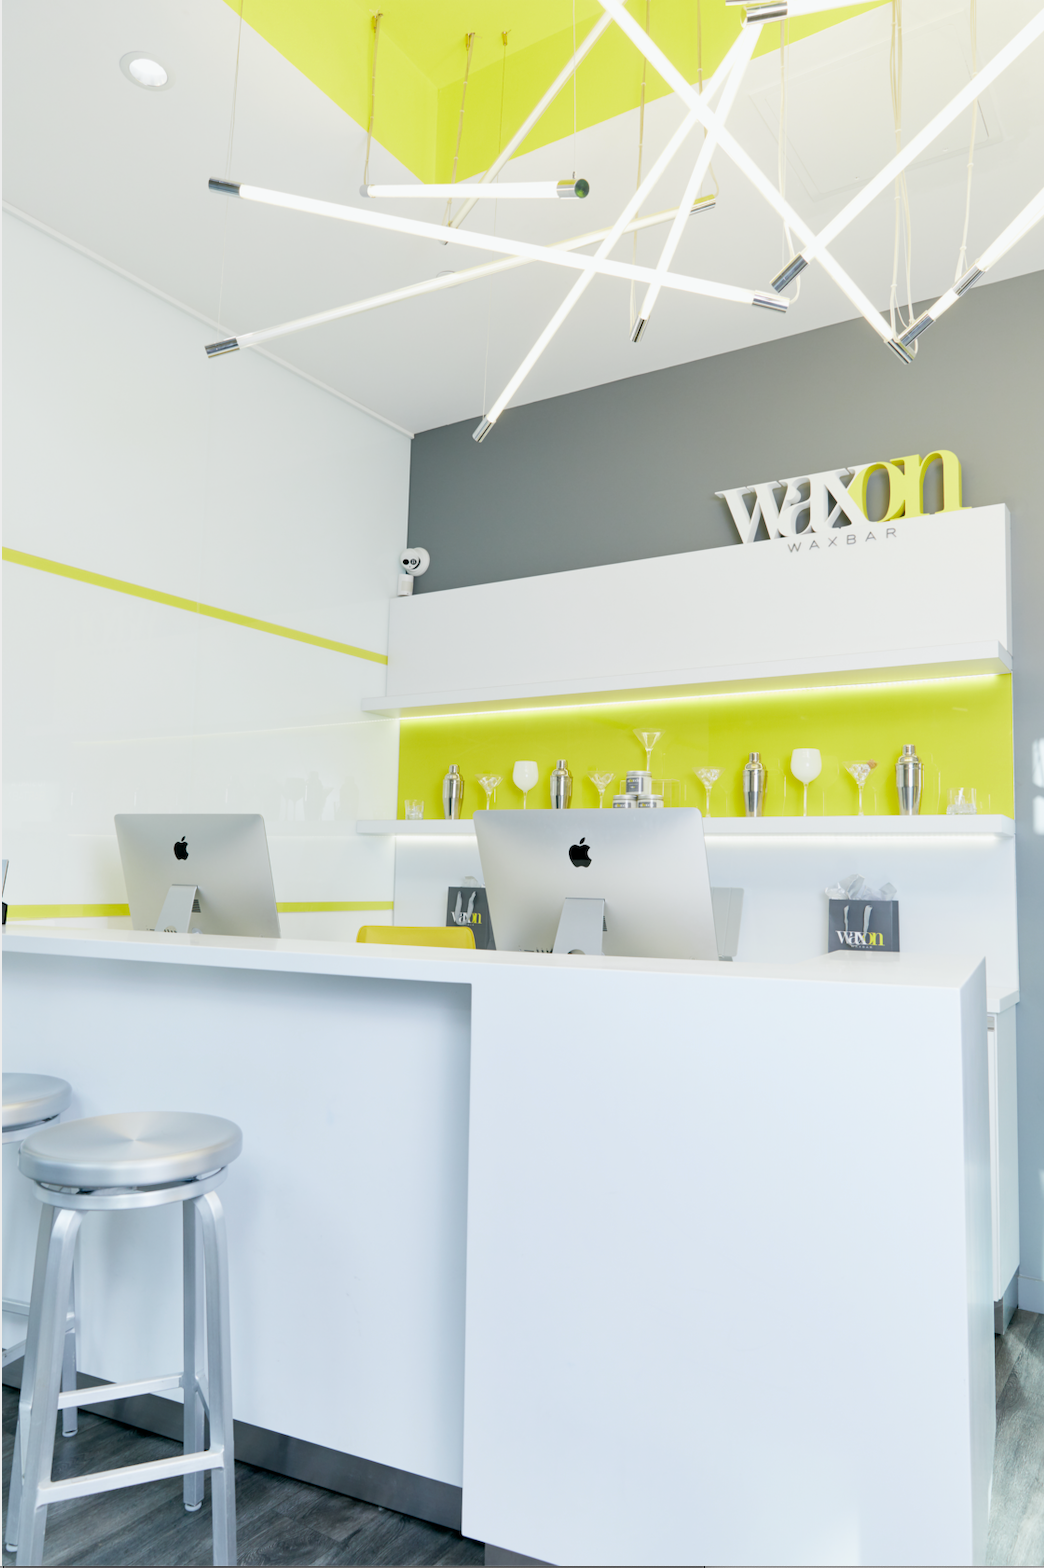 Interior photo of a WAXON Laser + Waxbar. The image is of the reception desk area where guests book hair removal services.